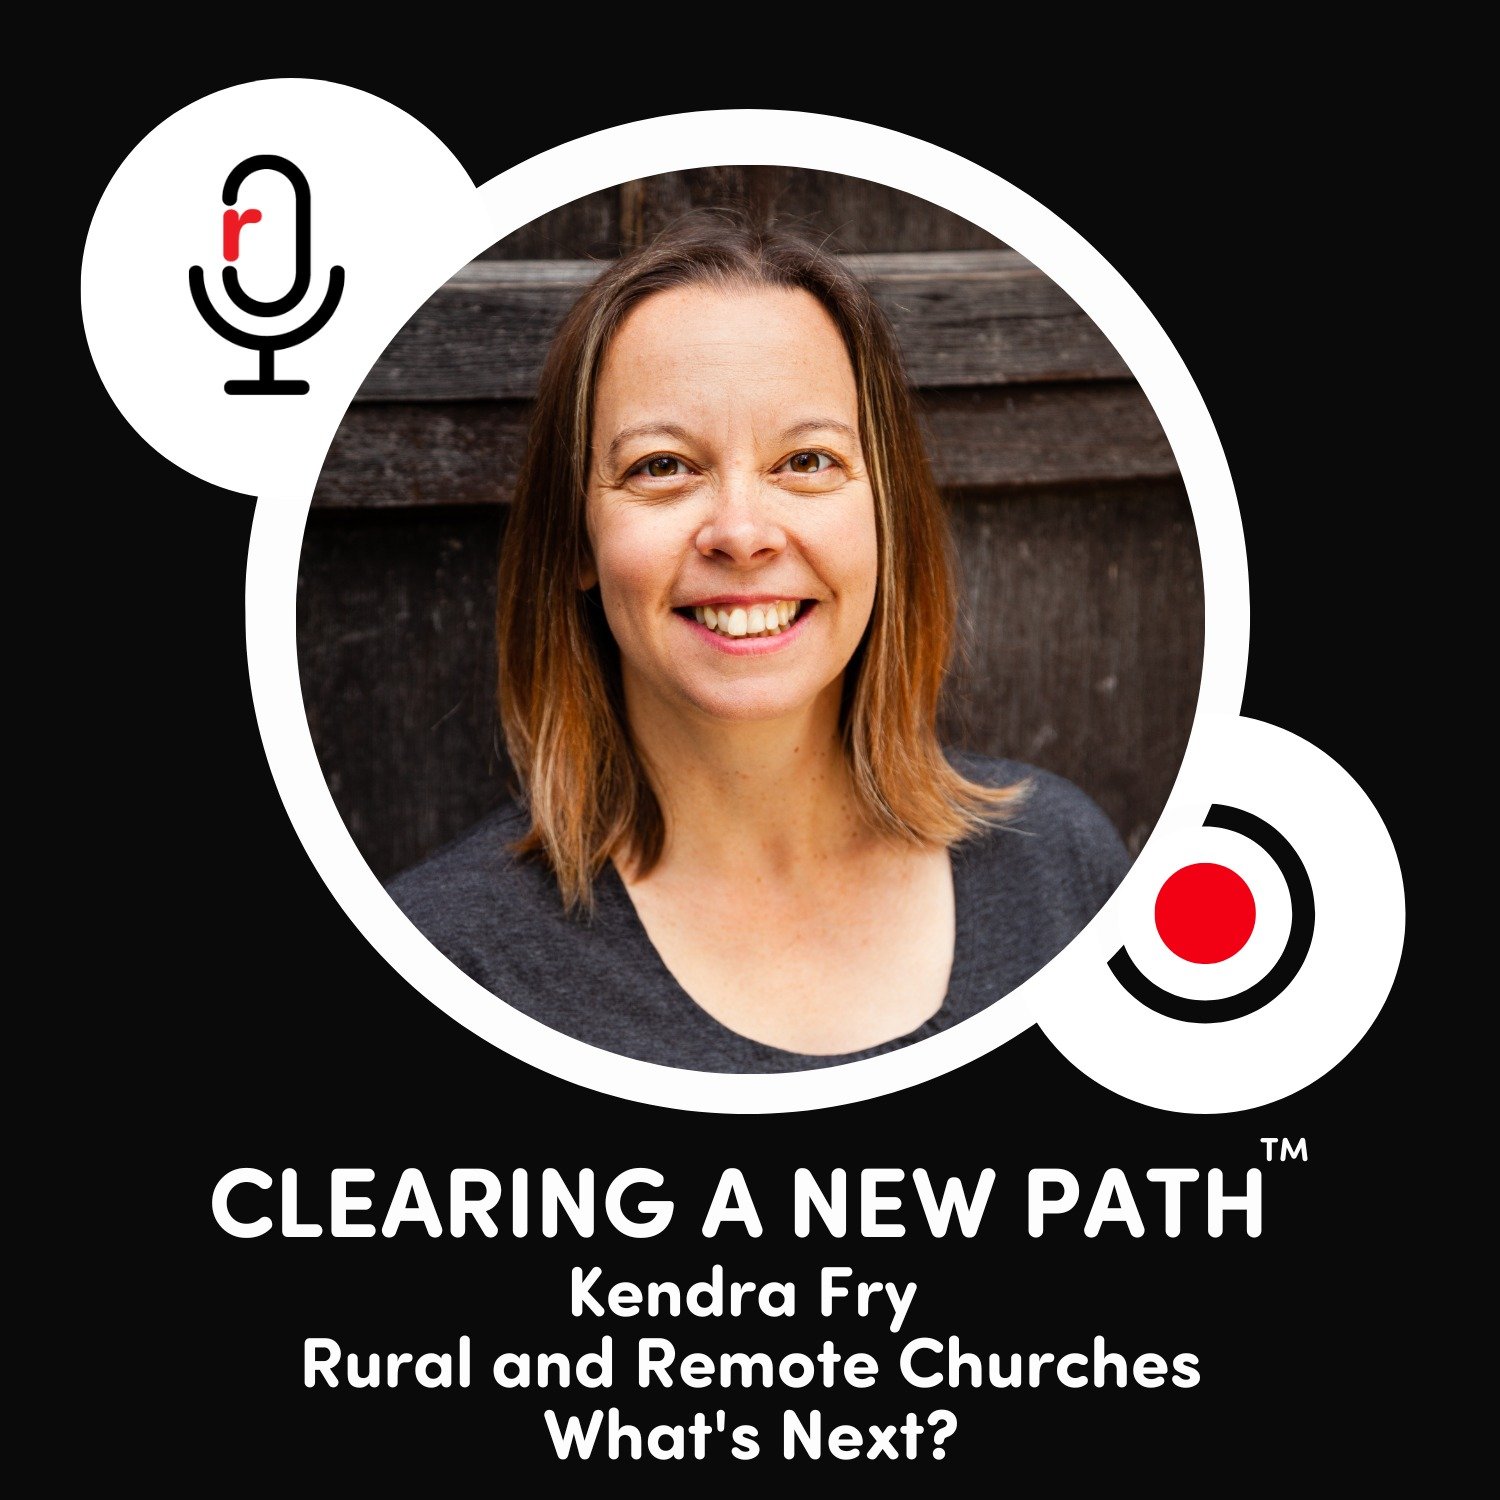 Kendra Fry - Rural and Remote Churches - What's Next?